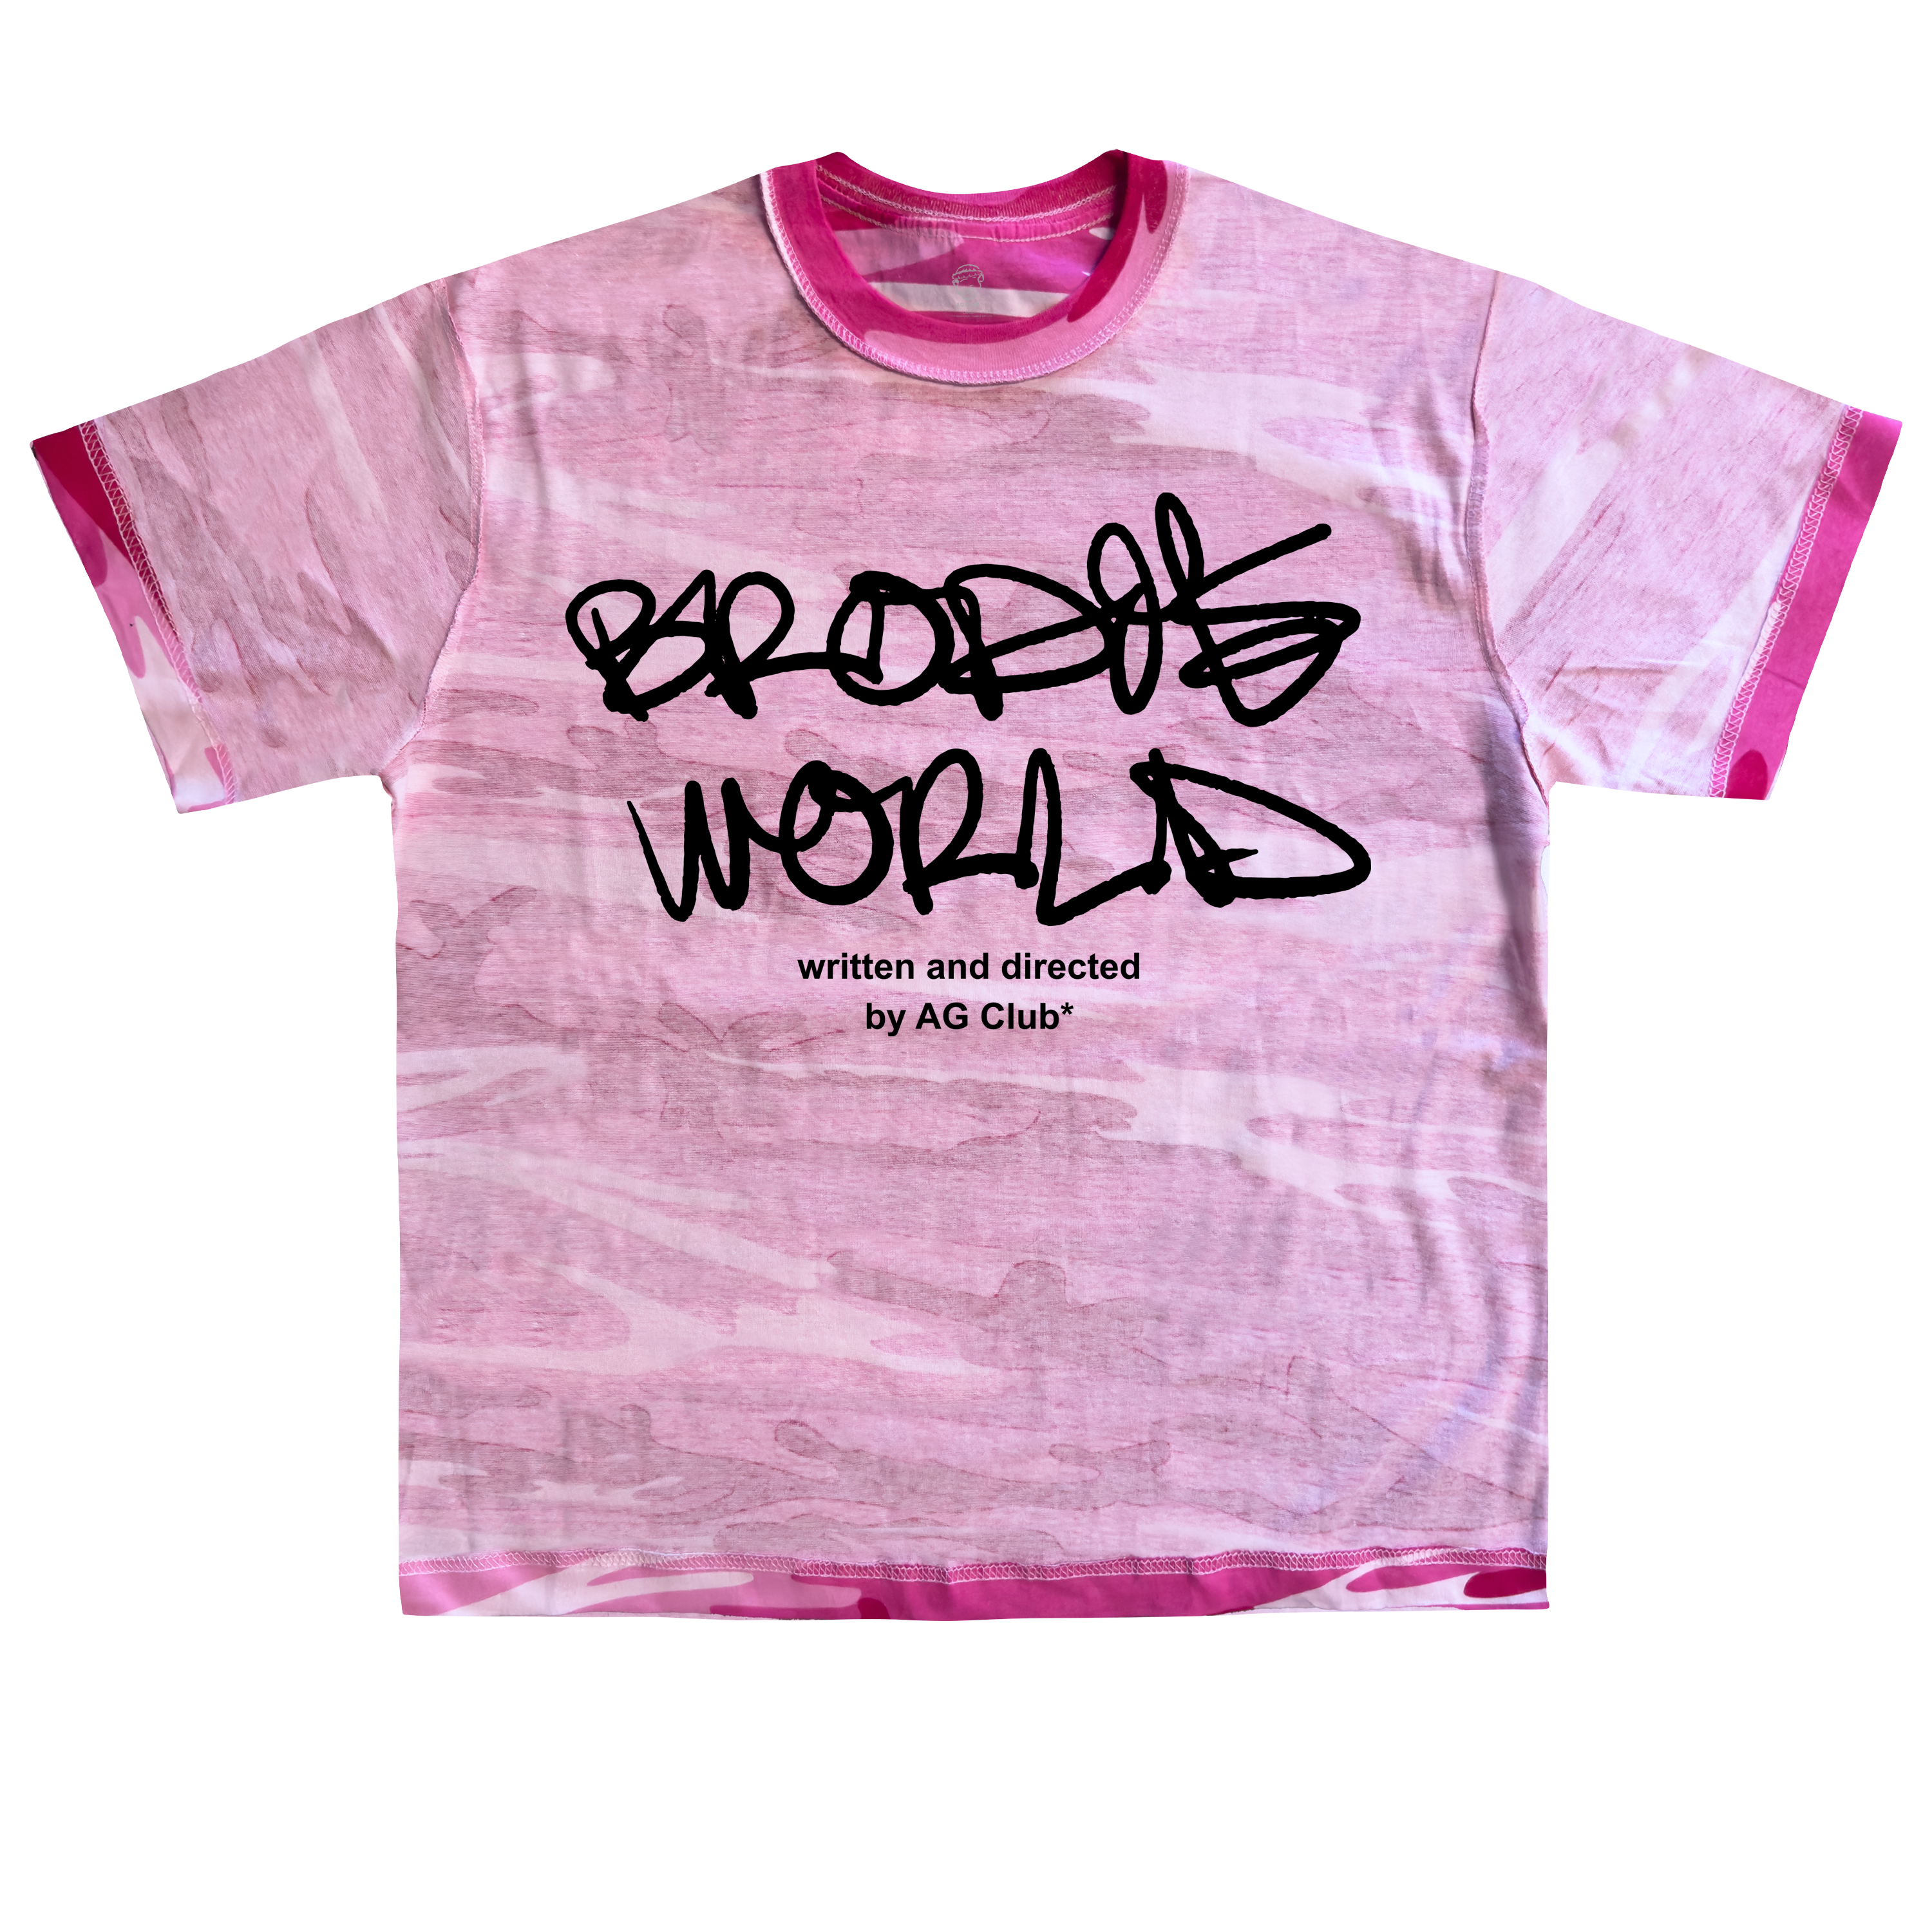 AG4 AG Club - Written and Directed Pink Camo Crop Top